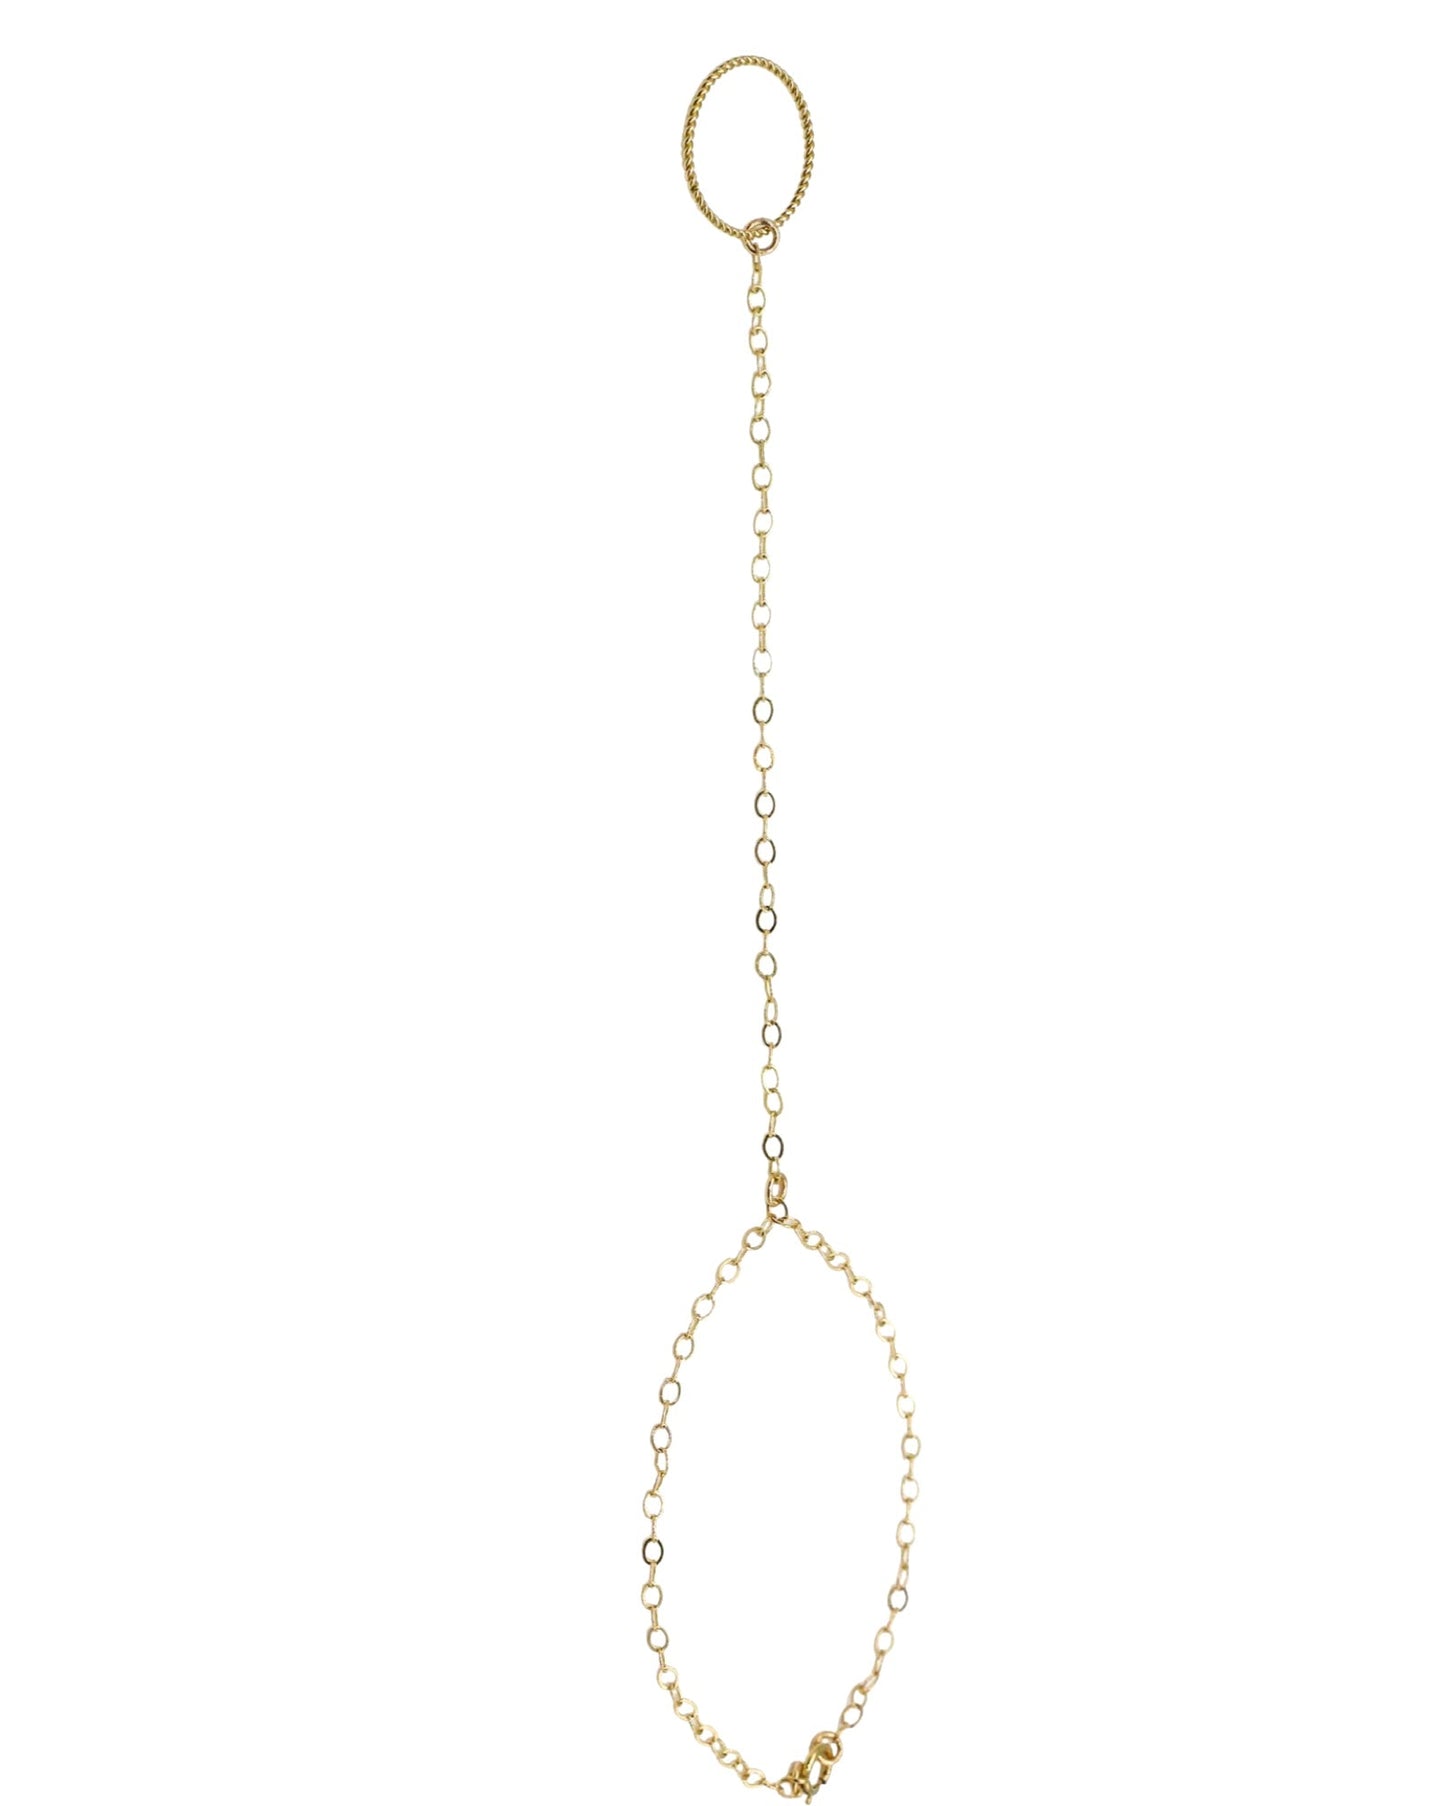 ELEVATED HAND CHAIN - DE.FINE Collection Jewelry